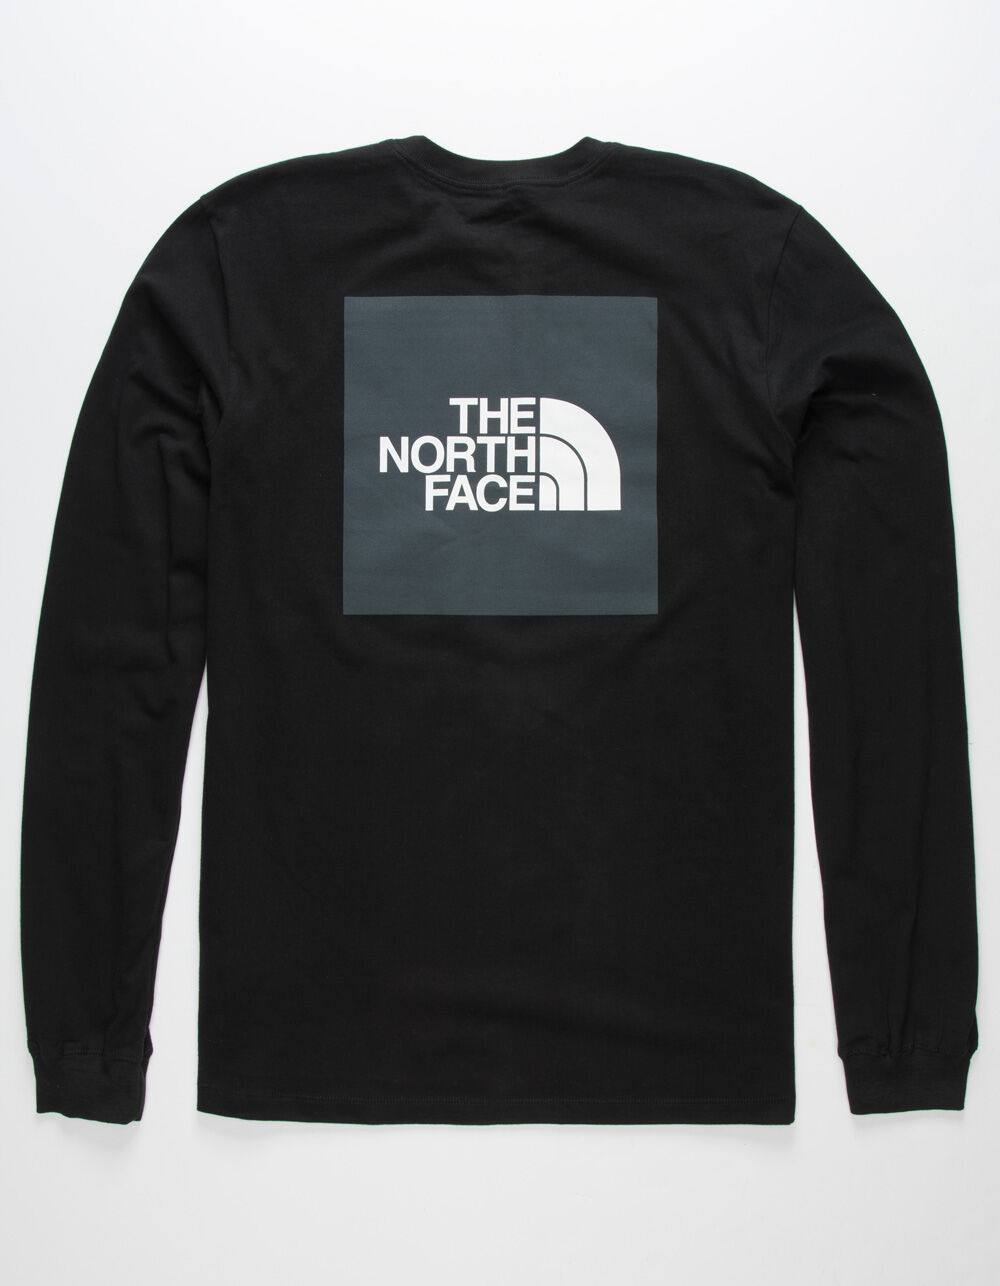 THE NORTH FACE Red Box Mens T-Shirt